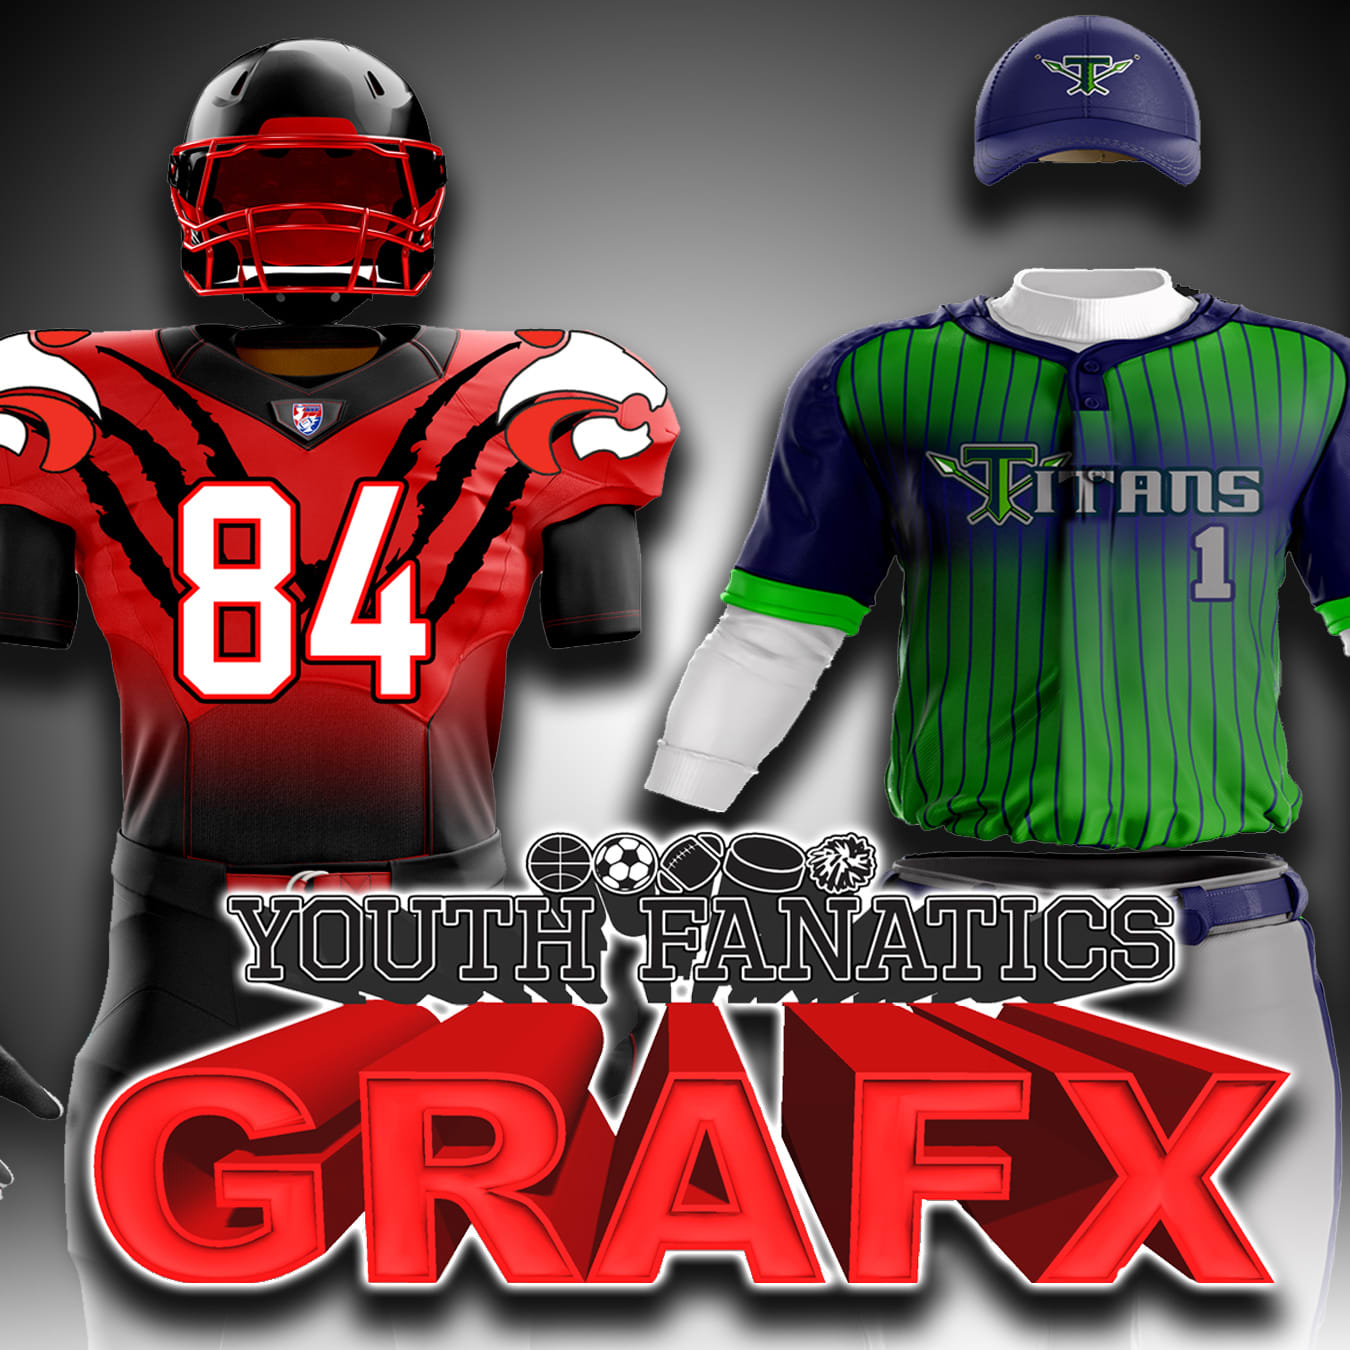 Download Create A Sports Uniform Mockup Within 1 Hour By Yfgrafx Fiverr